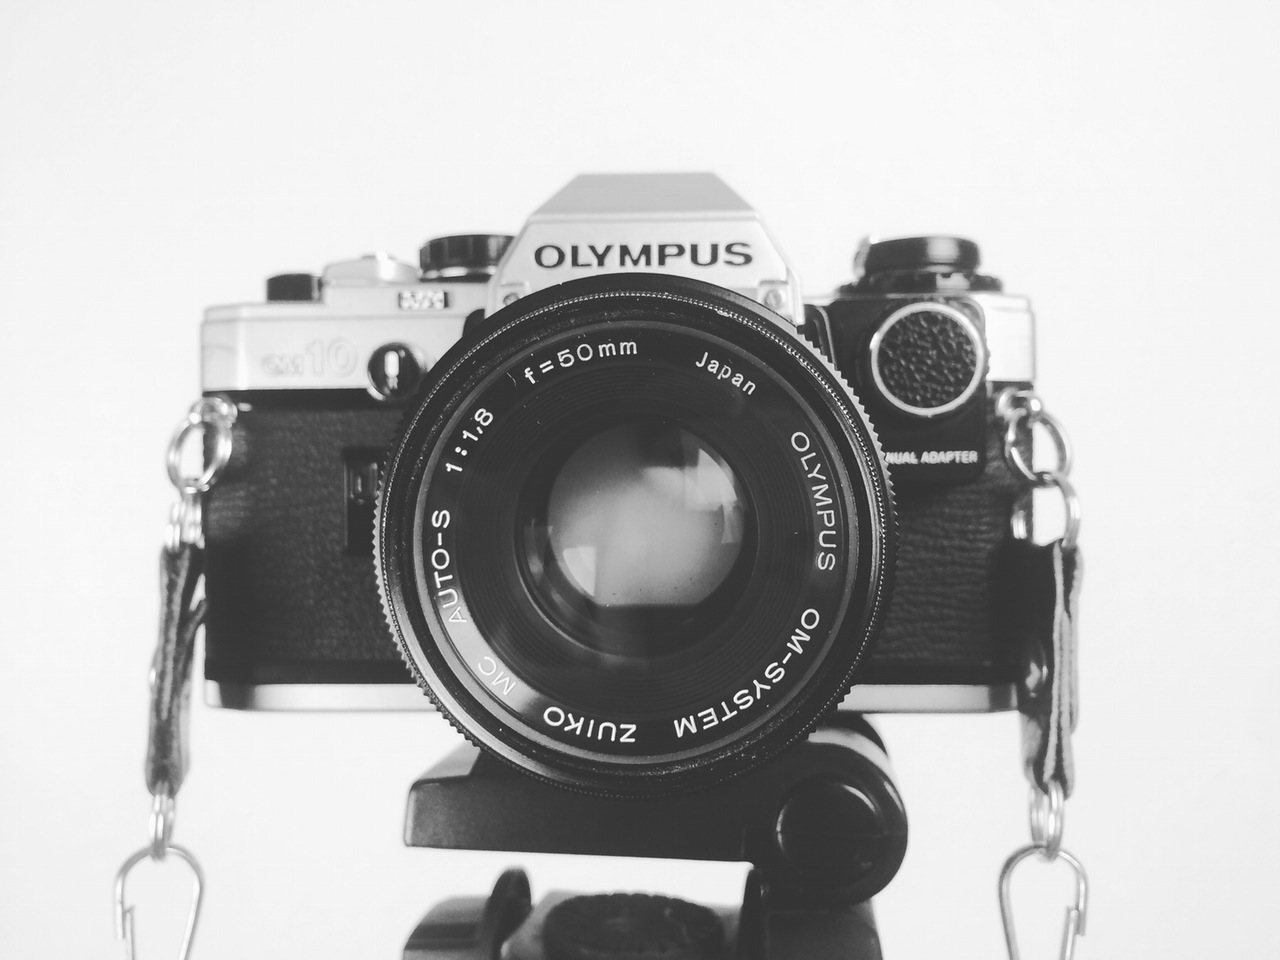 An image of Olympus camera